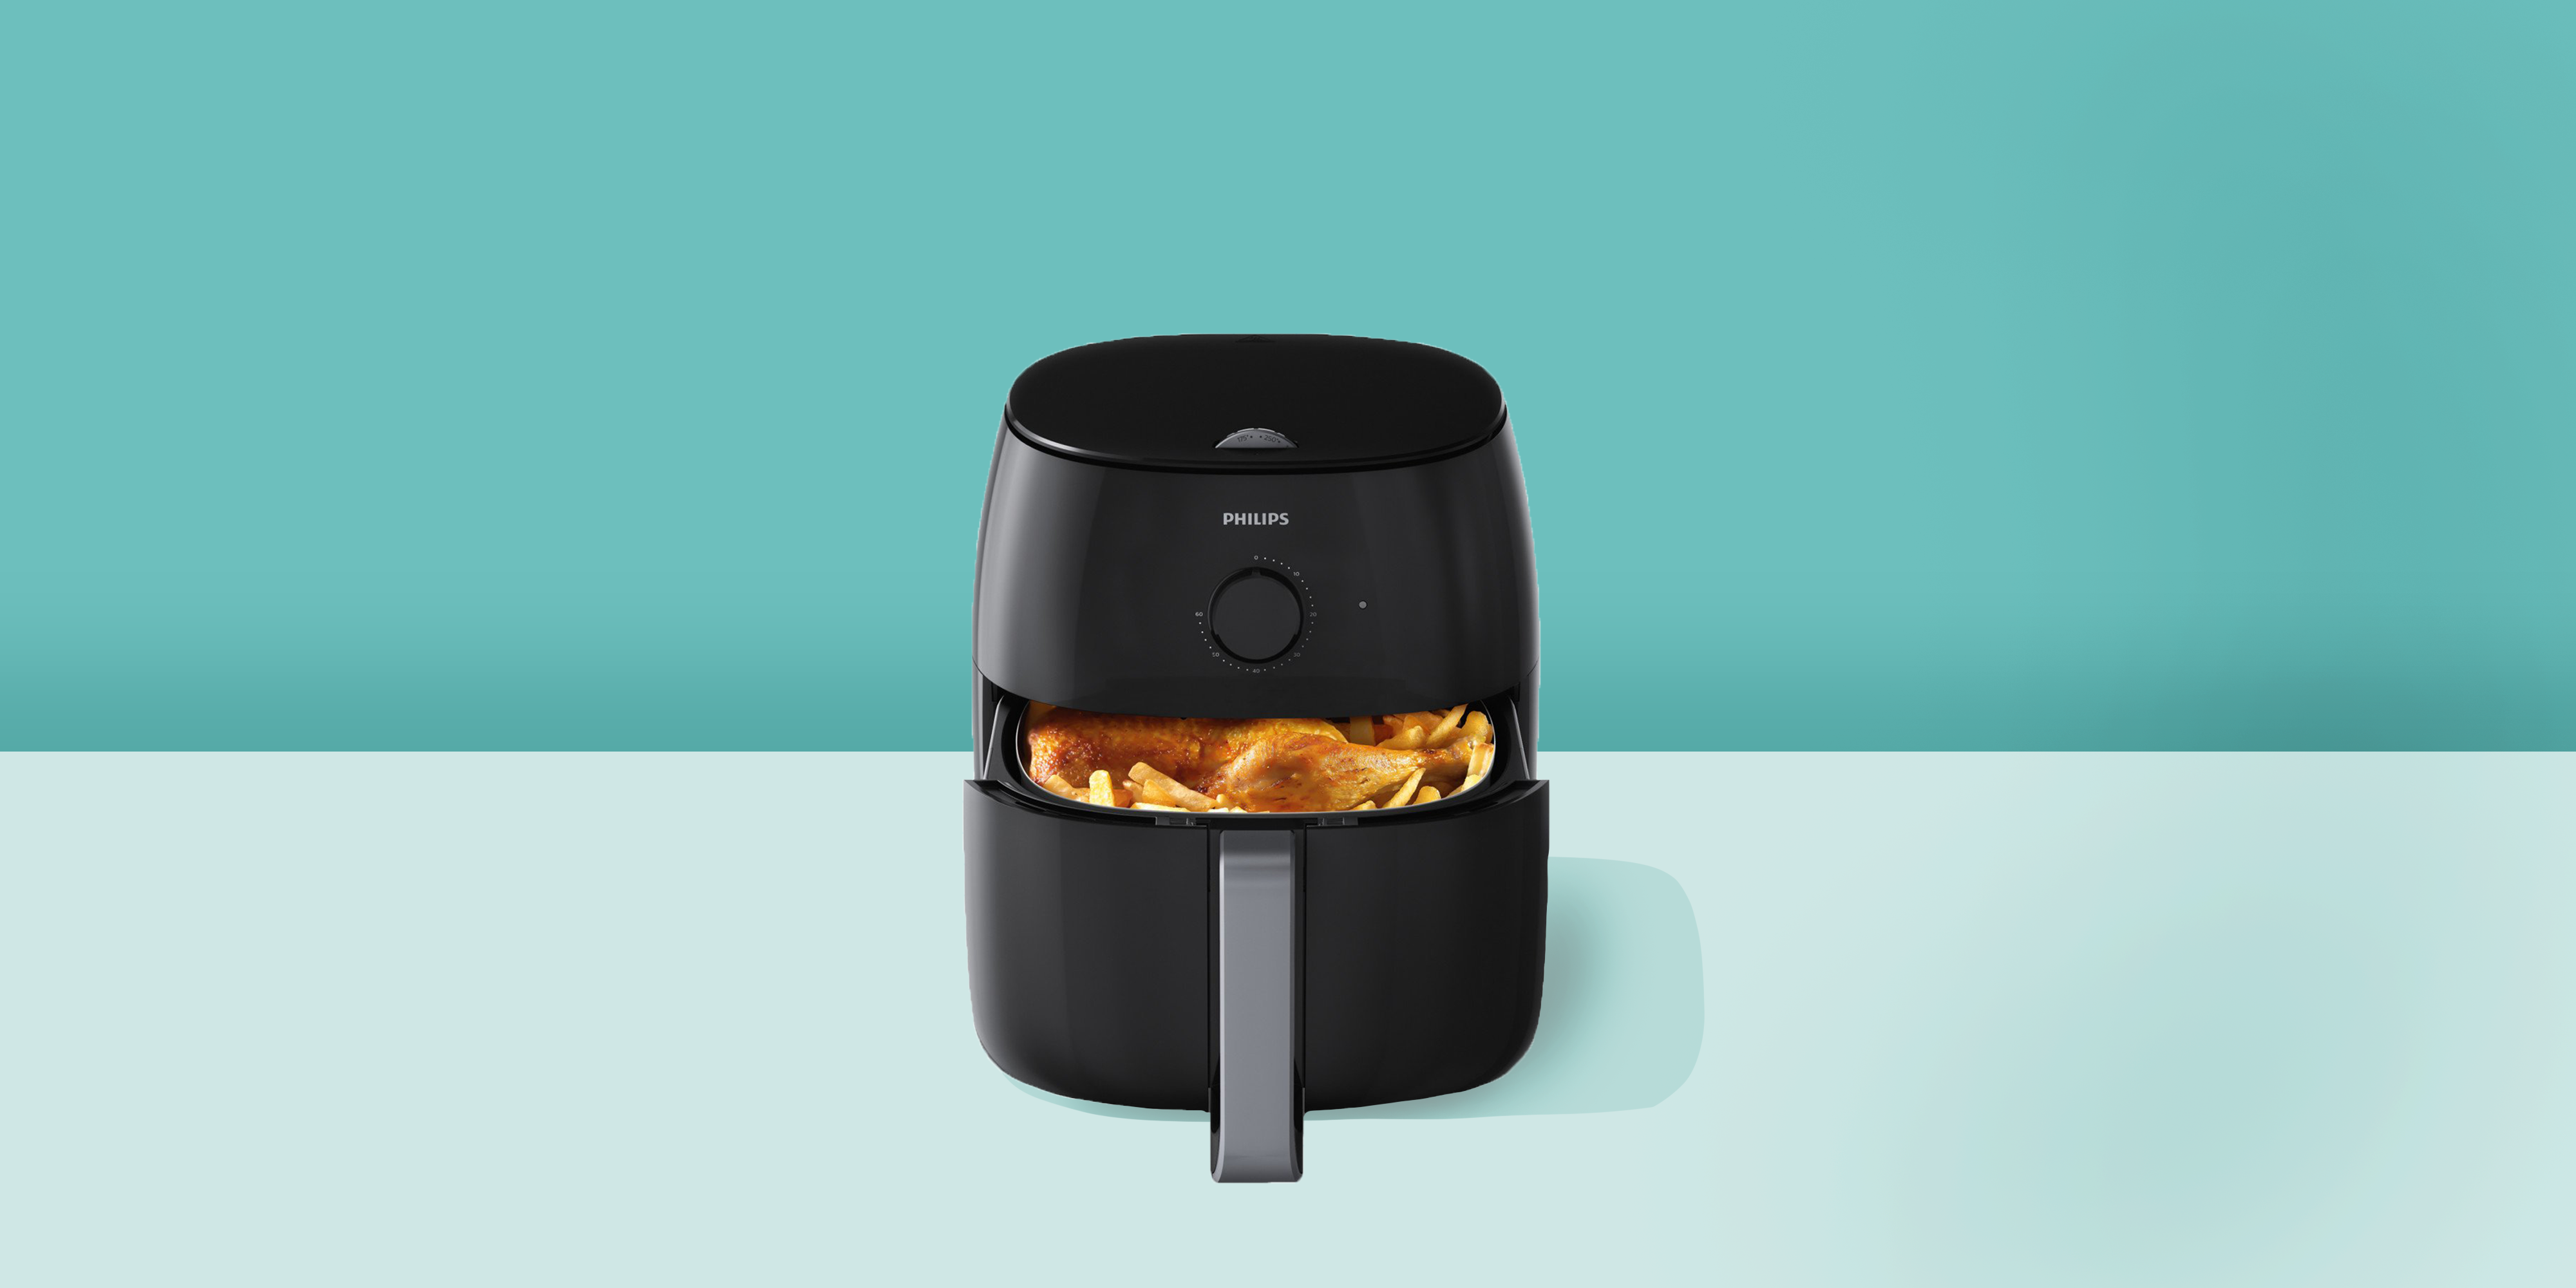 Philips Launches Smart, Innovative Kitchen Appliances to Create Delicious,  Healthy Meals at Home